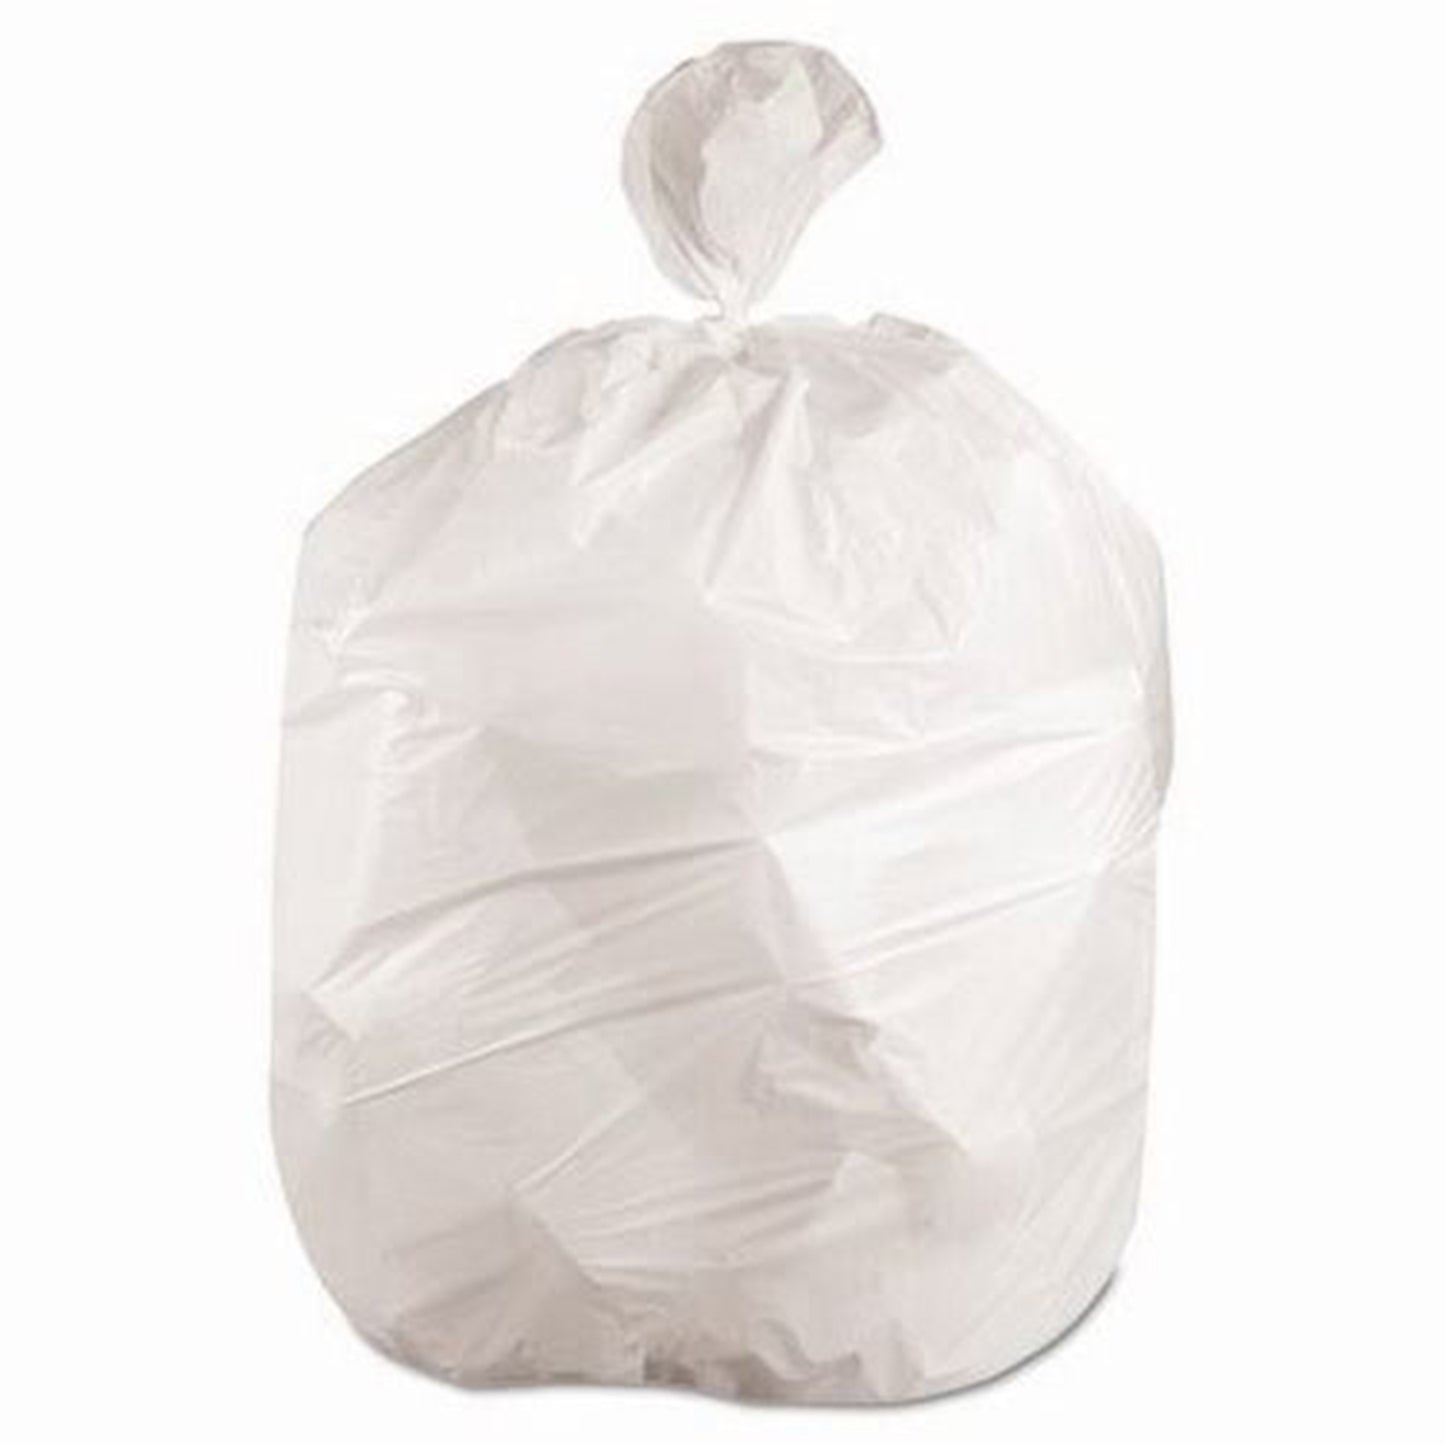 Trash Bags - : Online Kosher Grocery Shopping and Home  Delivery Service in Brooklyn